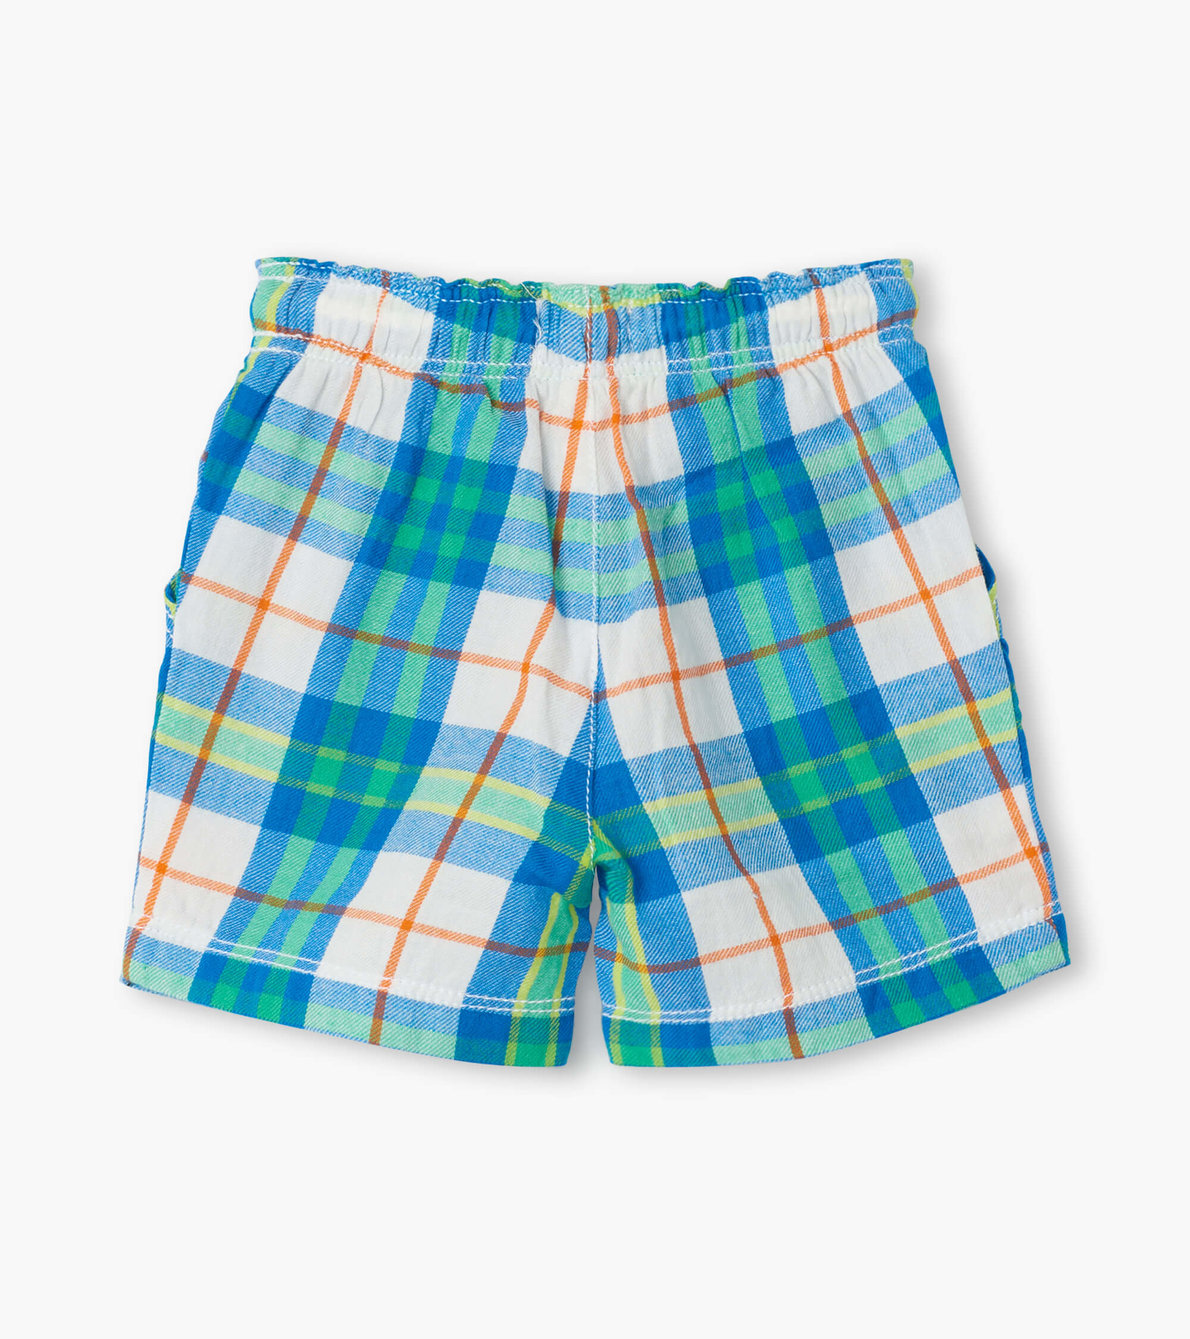 View larger image of Tropical Plaid Baby Woven Shorts